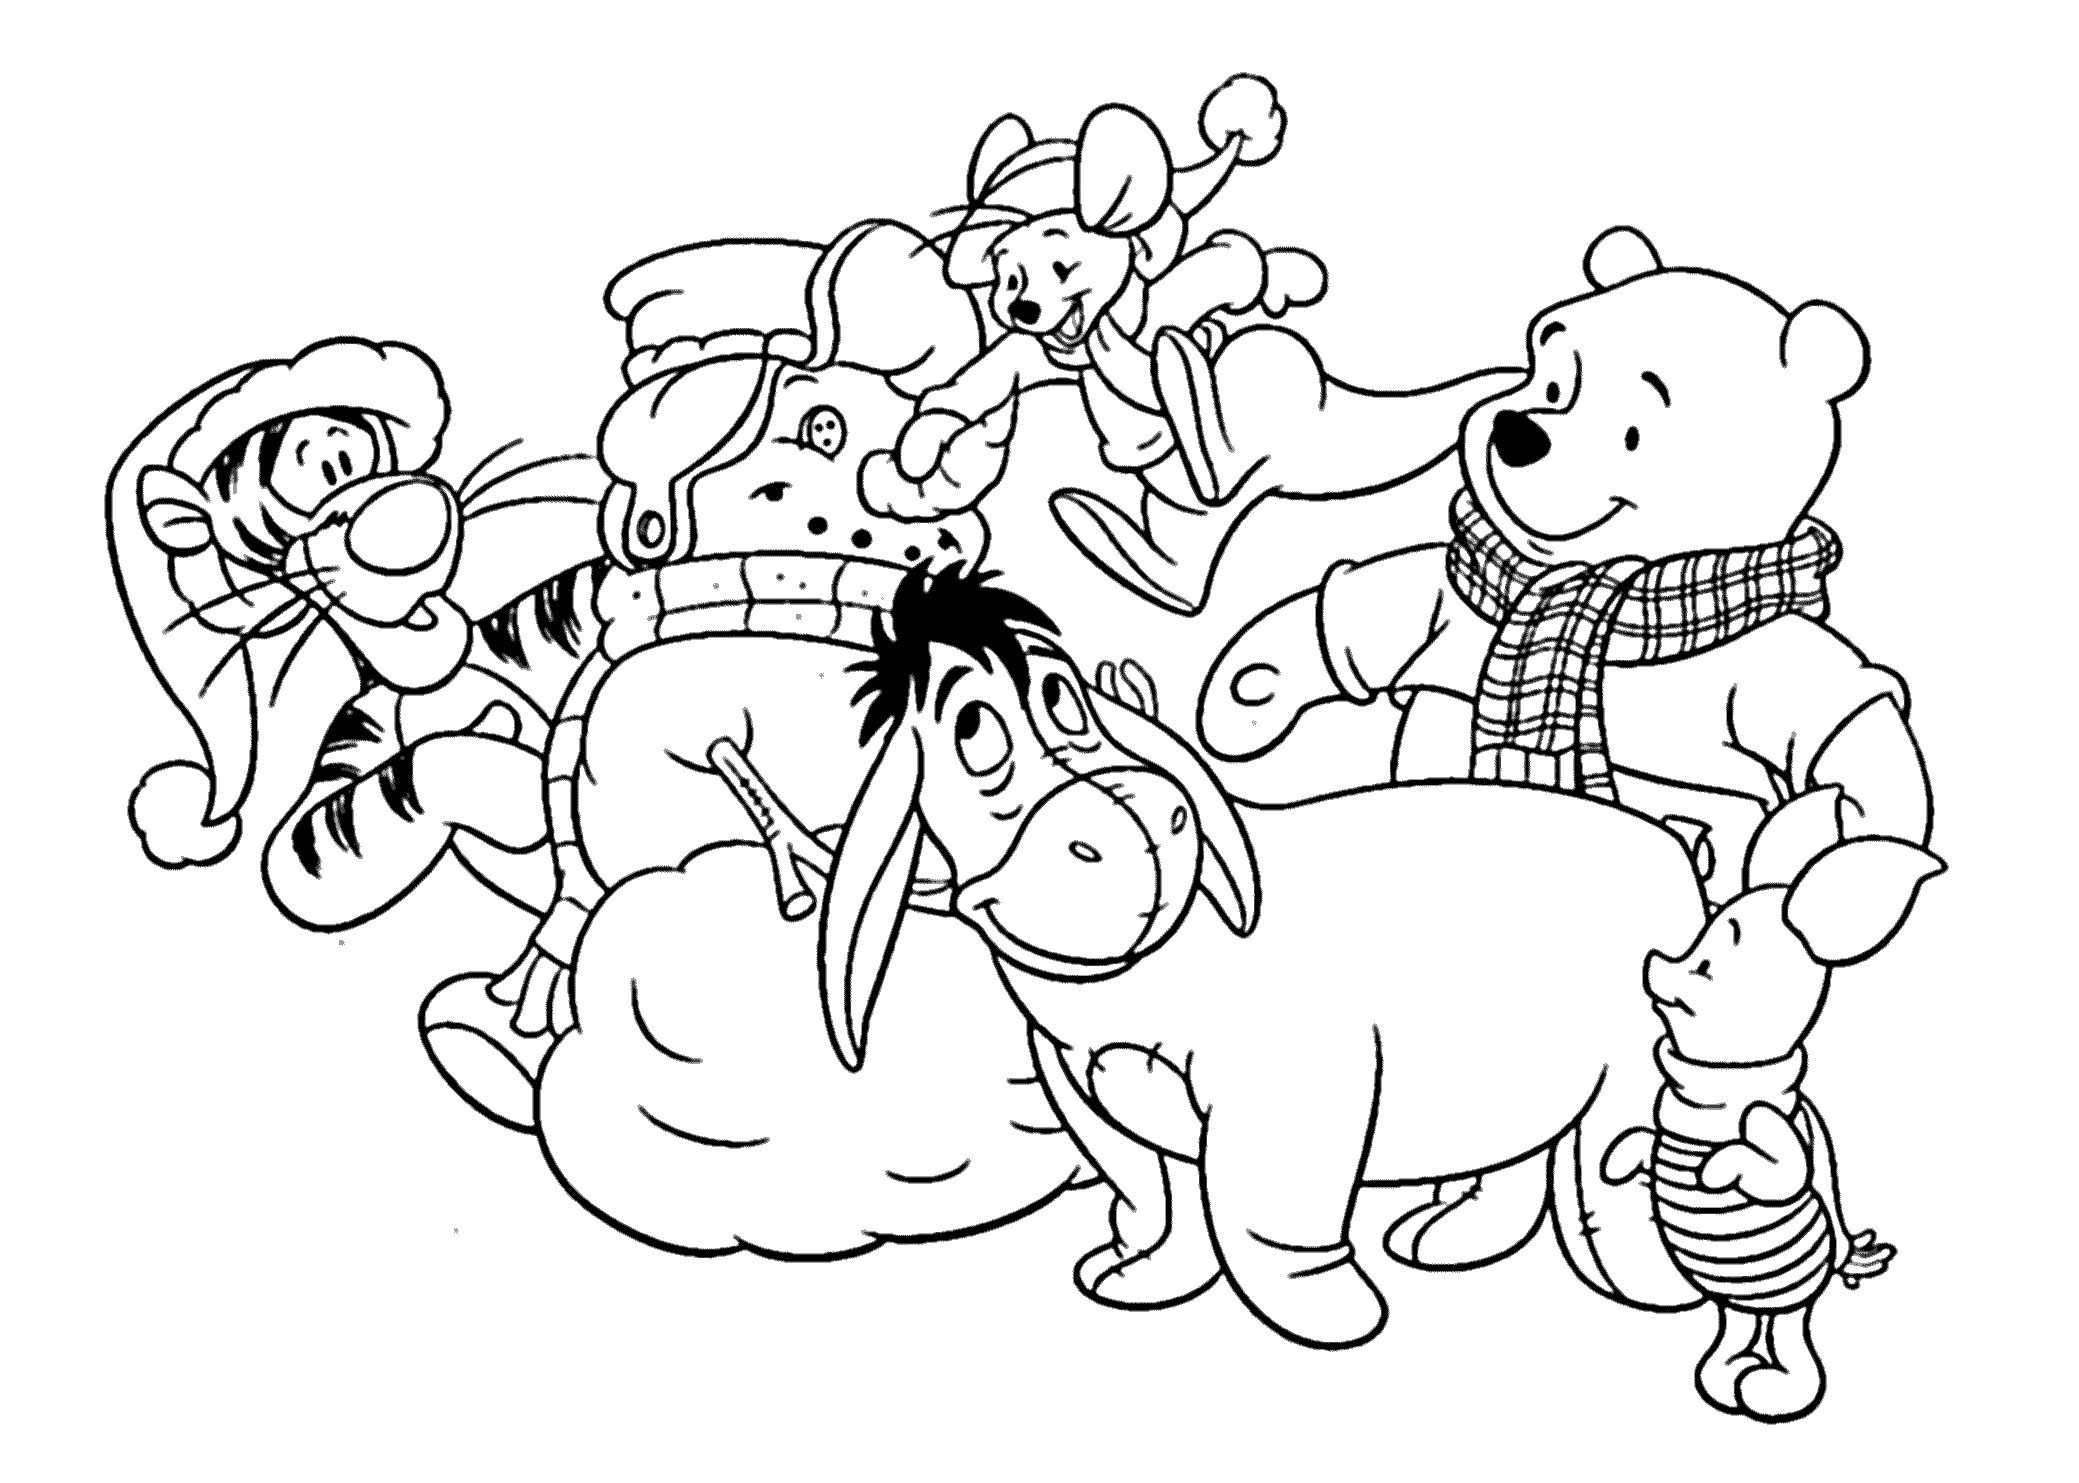 Winnie the Pooh Coloring Pages Cartoons Pooh Holidays Printable 2020 7006 Coloring4free